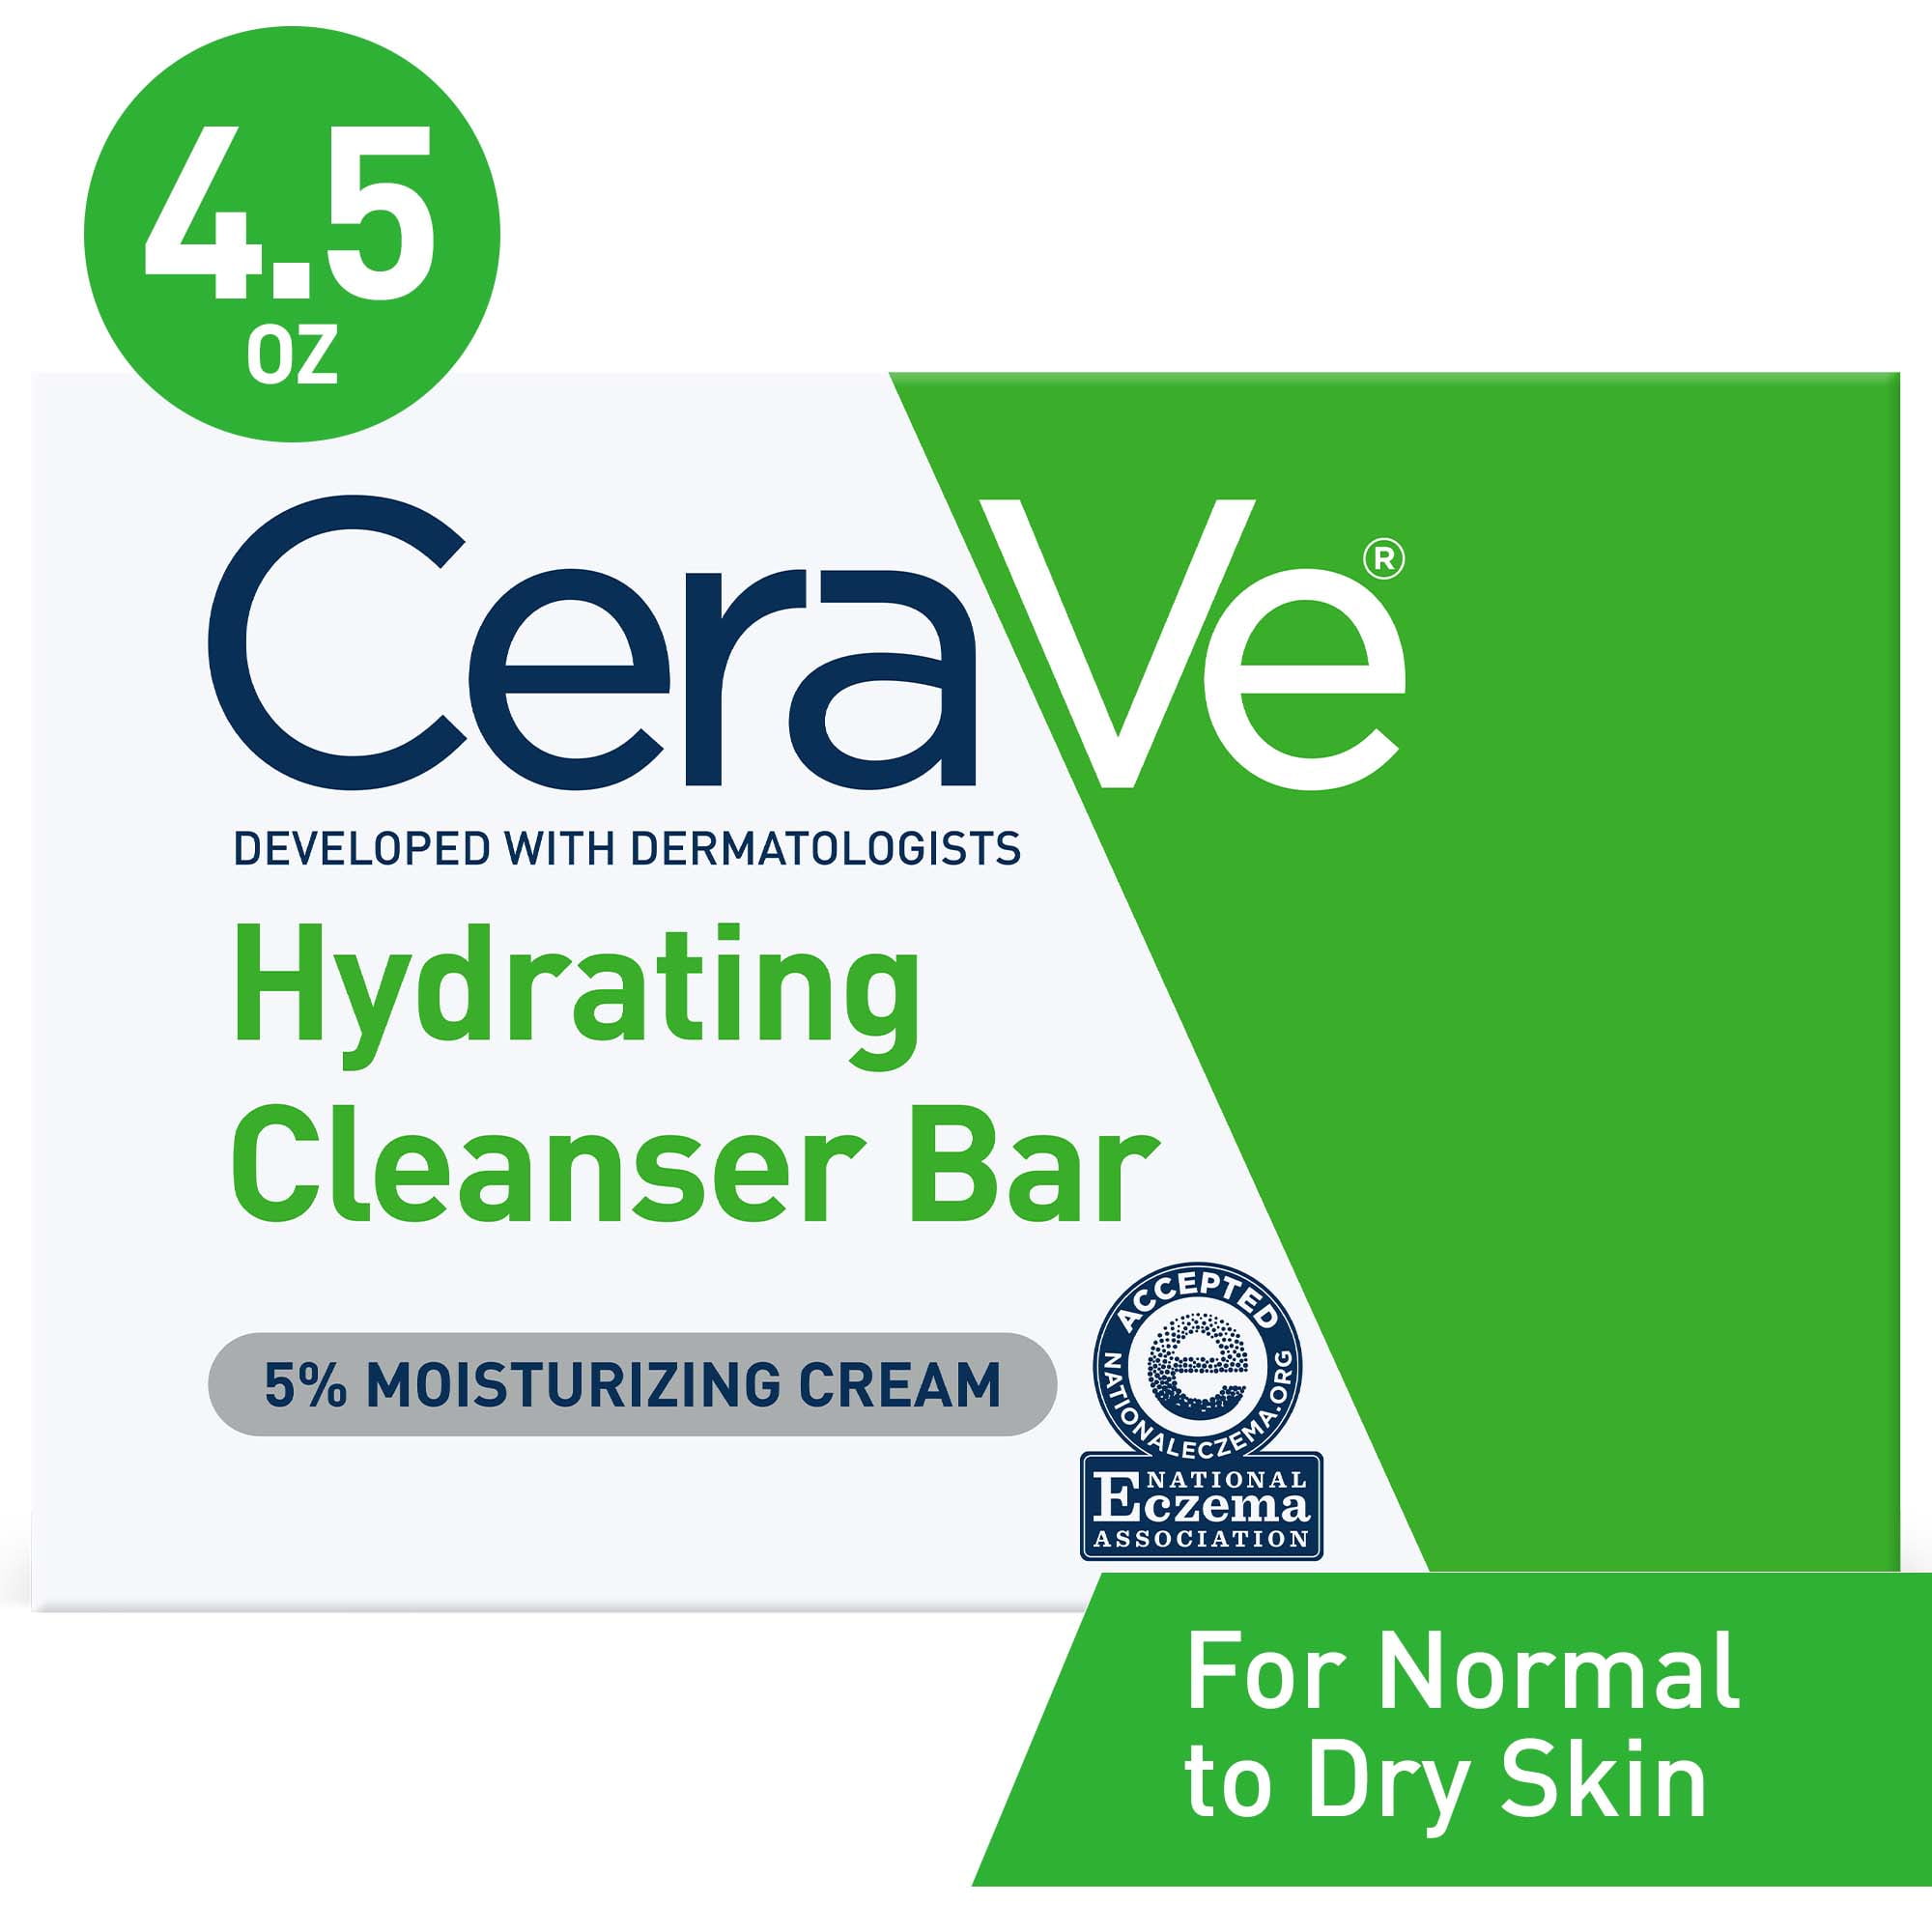 CeraVe Hydrating Cleansing Bar for Face and Body, 4.5 oz